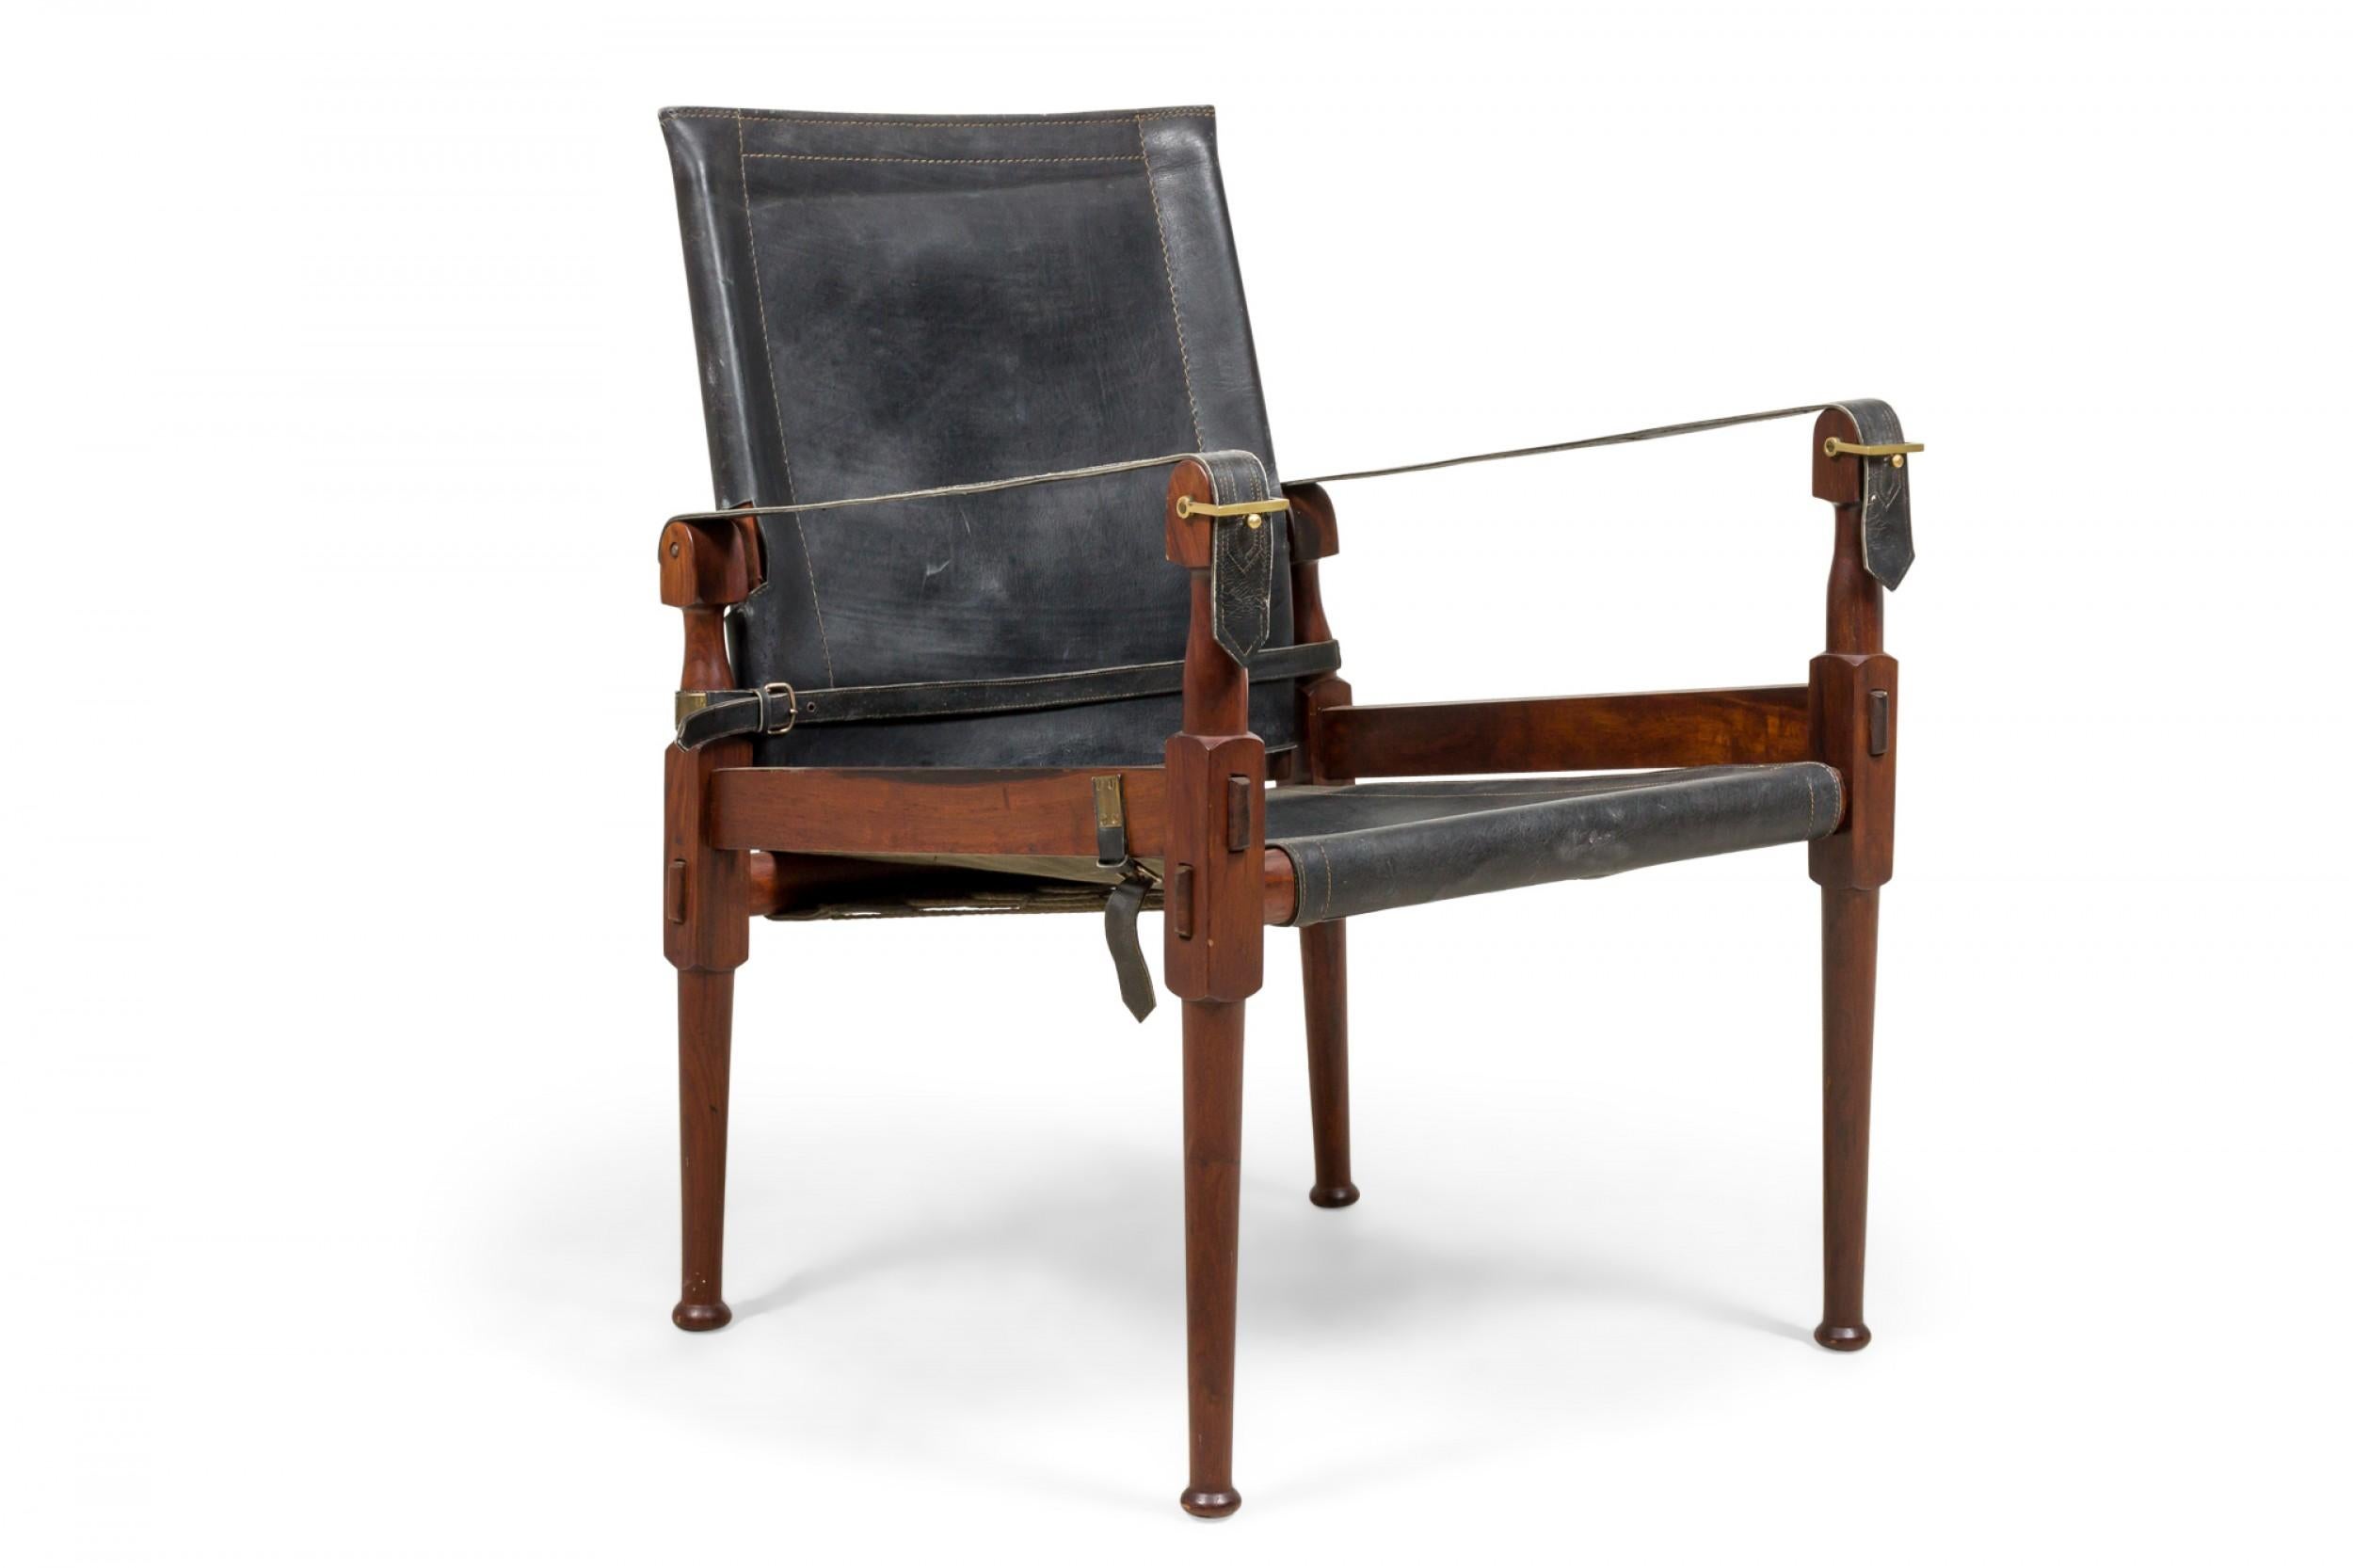 Pair of Pakistani mid-century 'Roorkee' safari campaign chairs with carved walnut frames and black leather sling seats, backs and arms that collapse down to a portable form. (M. HAYAT & BROS LTD)(PRICED AS PAIR)